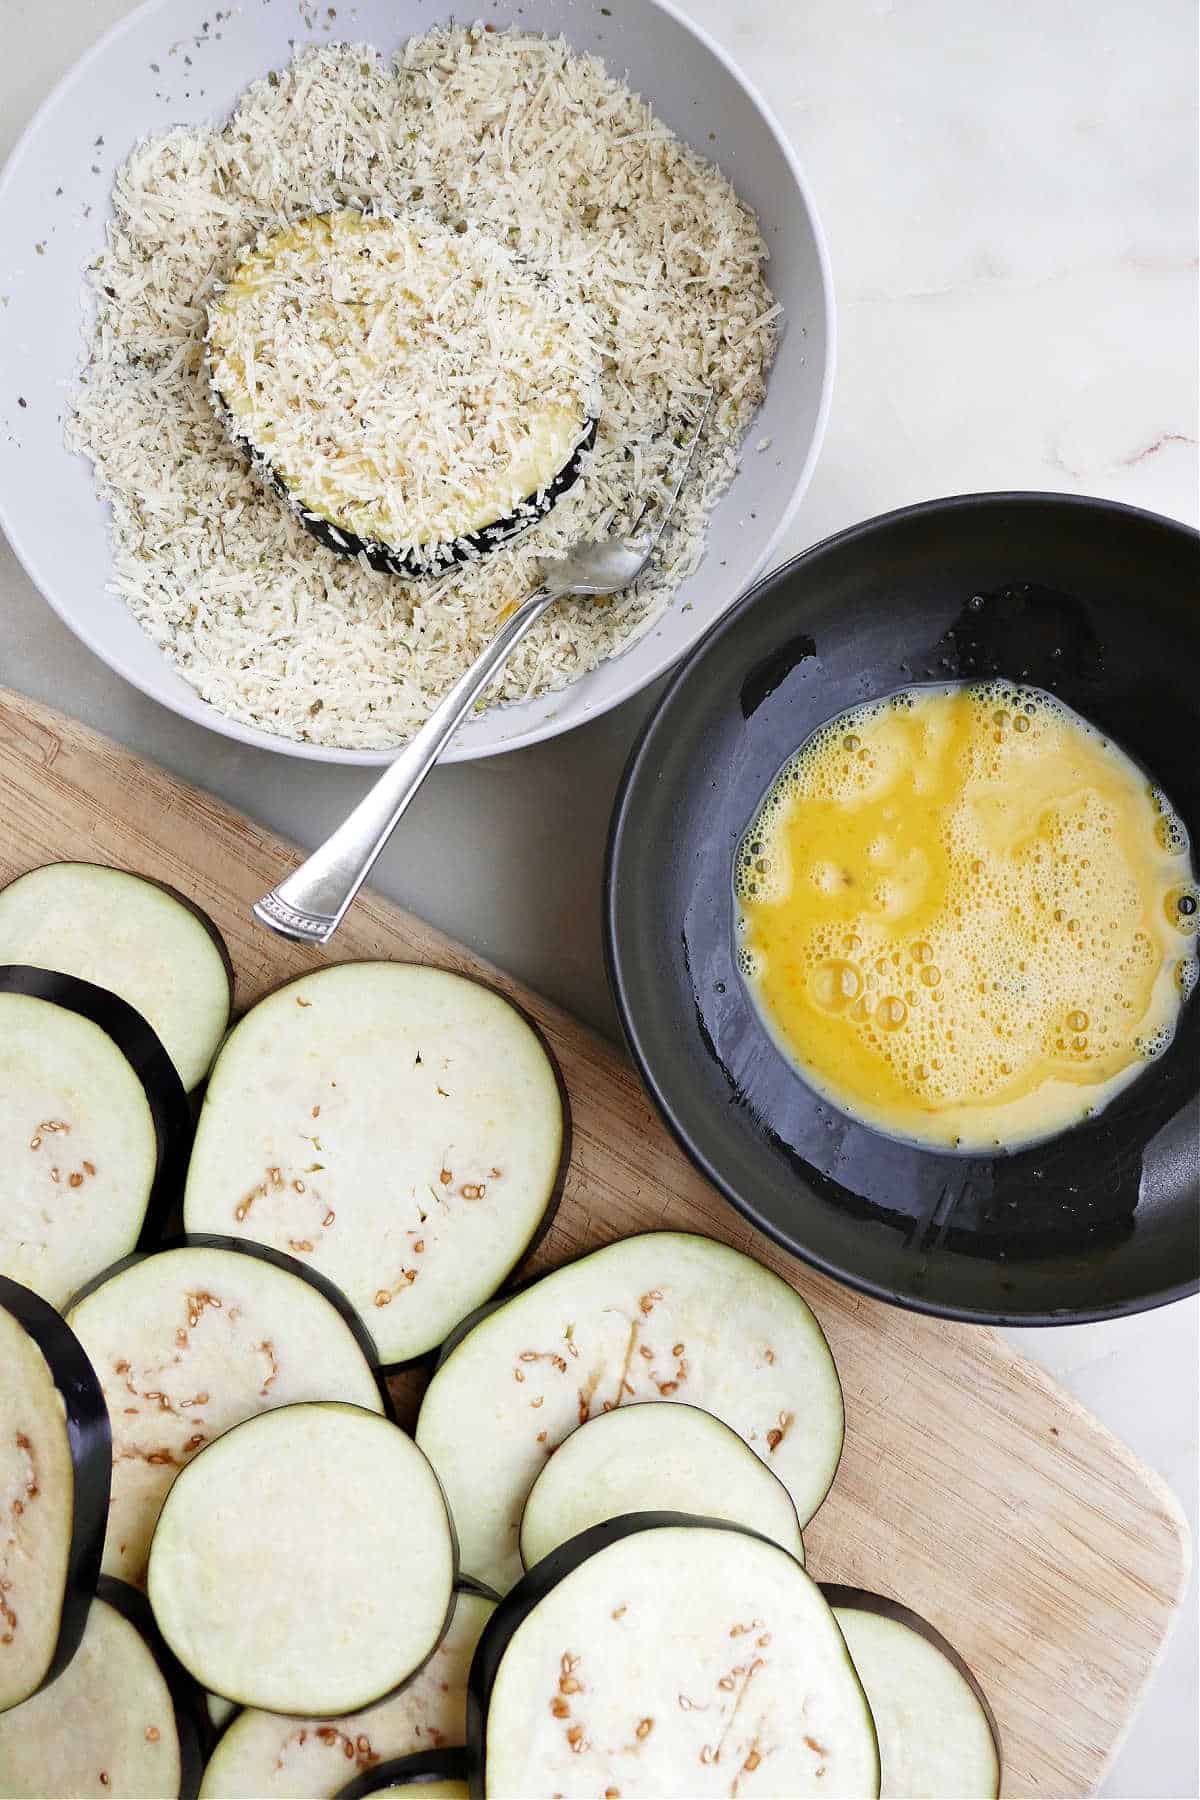 eggplant slices next to bowls with beaten eggs and breadcrumb coating